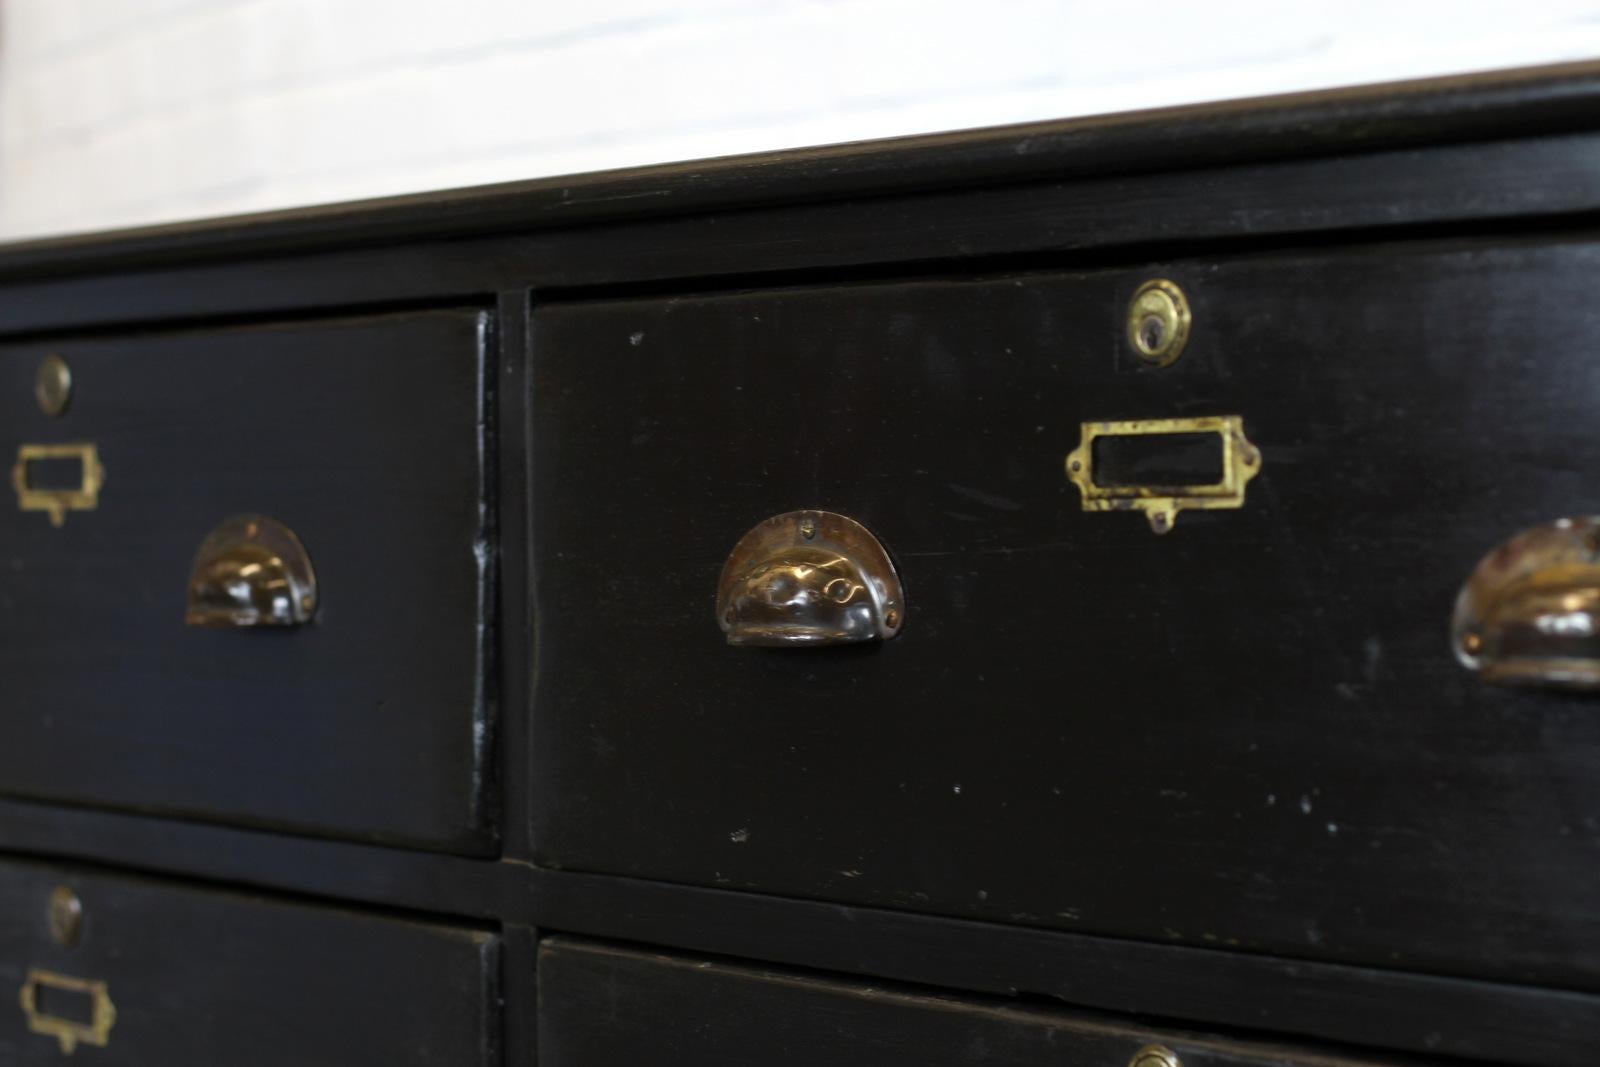 English ebonized tailors drawers, circa 1870s.

- Oak top and sides
- Pitch Pine drawers
- Rolled copper handles with brass card holders
- 9 large drawers
- Hand cut dovetail drawer joints
- English, circa 1870s
- Measures: 273cm long x 71cm